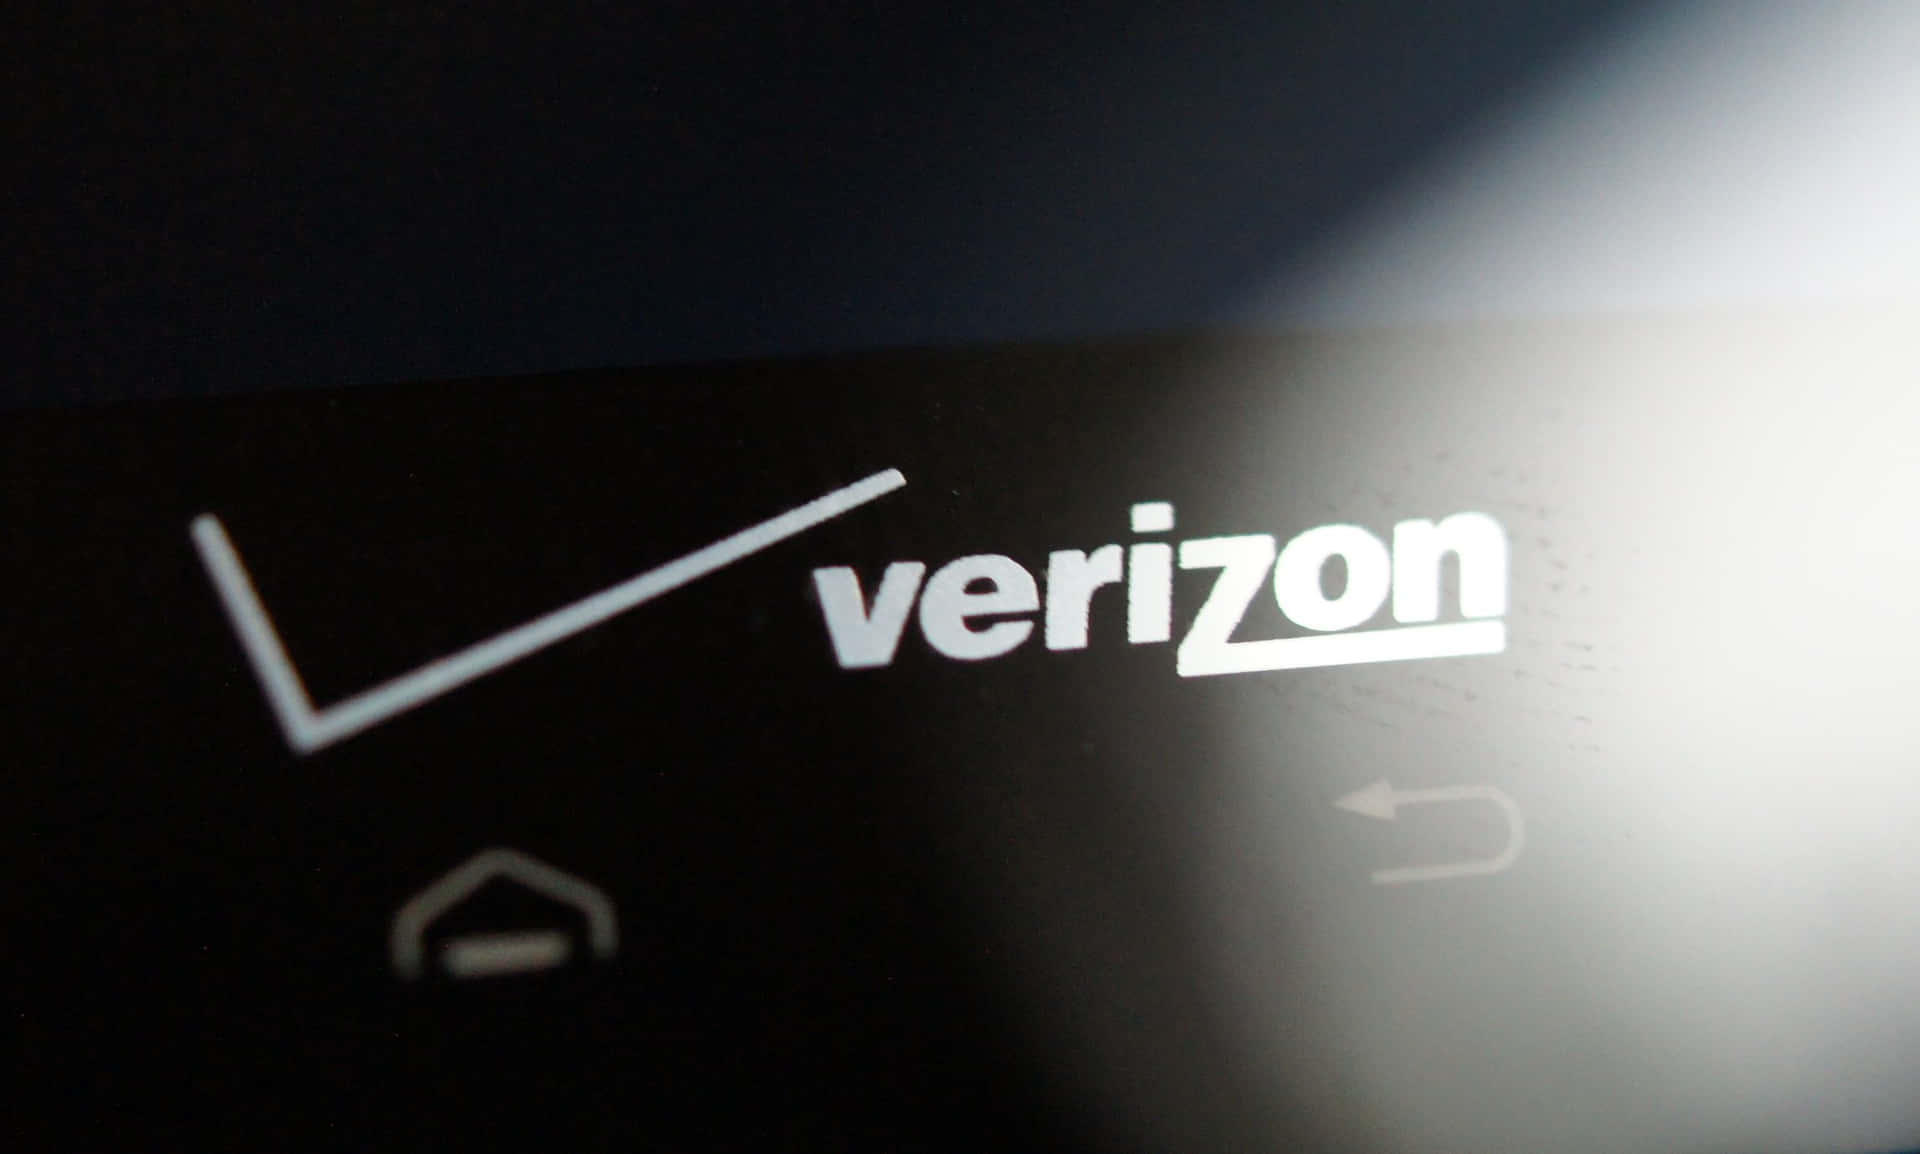 Look to Verizon for unparalleled wireless coverage